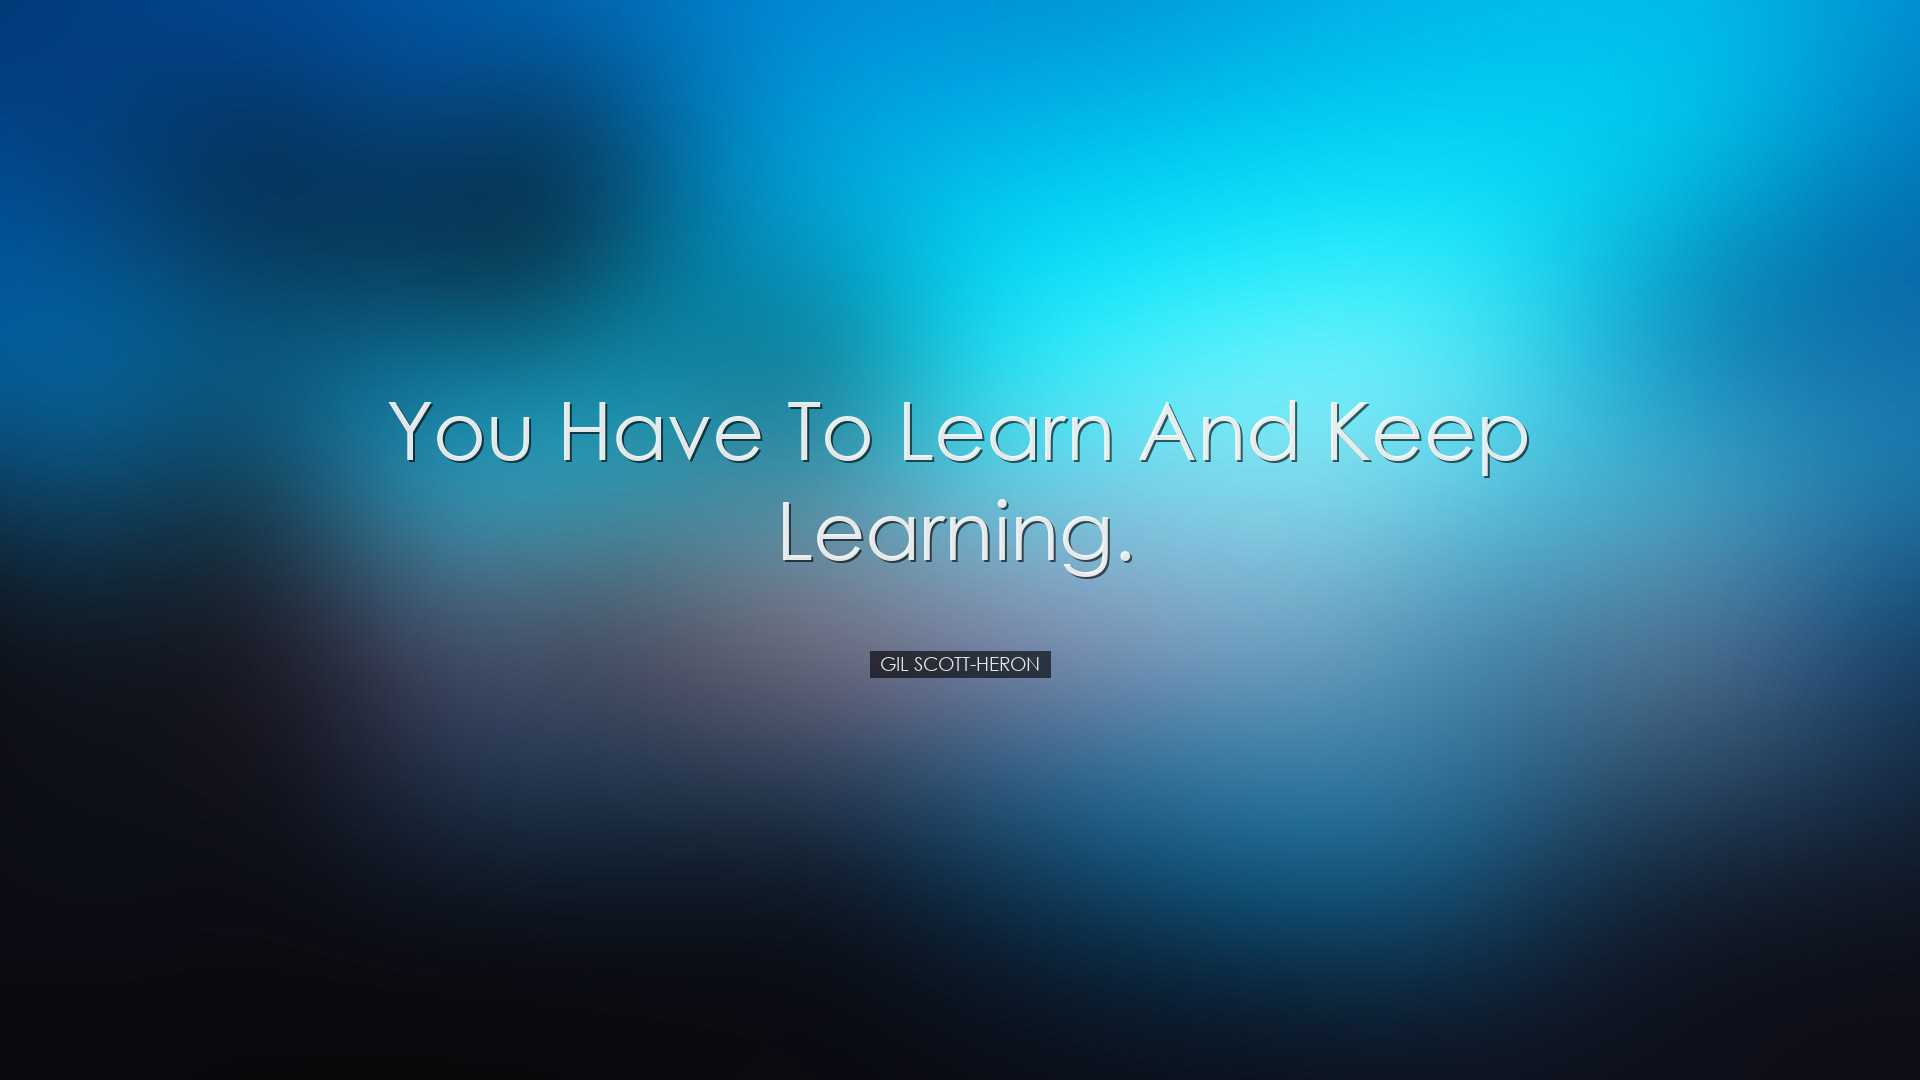 You have to learn and keep learning. - Gil Scott-Heron